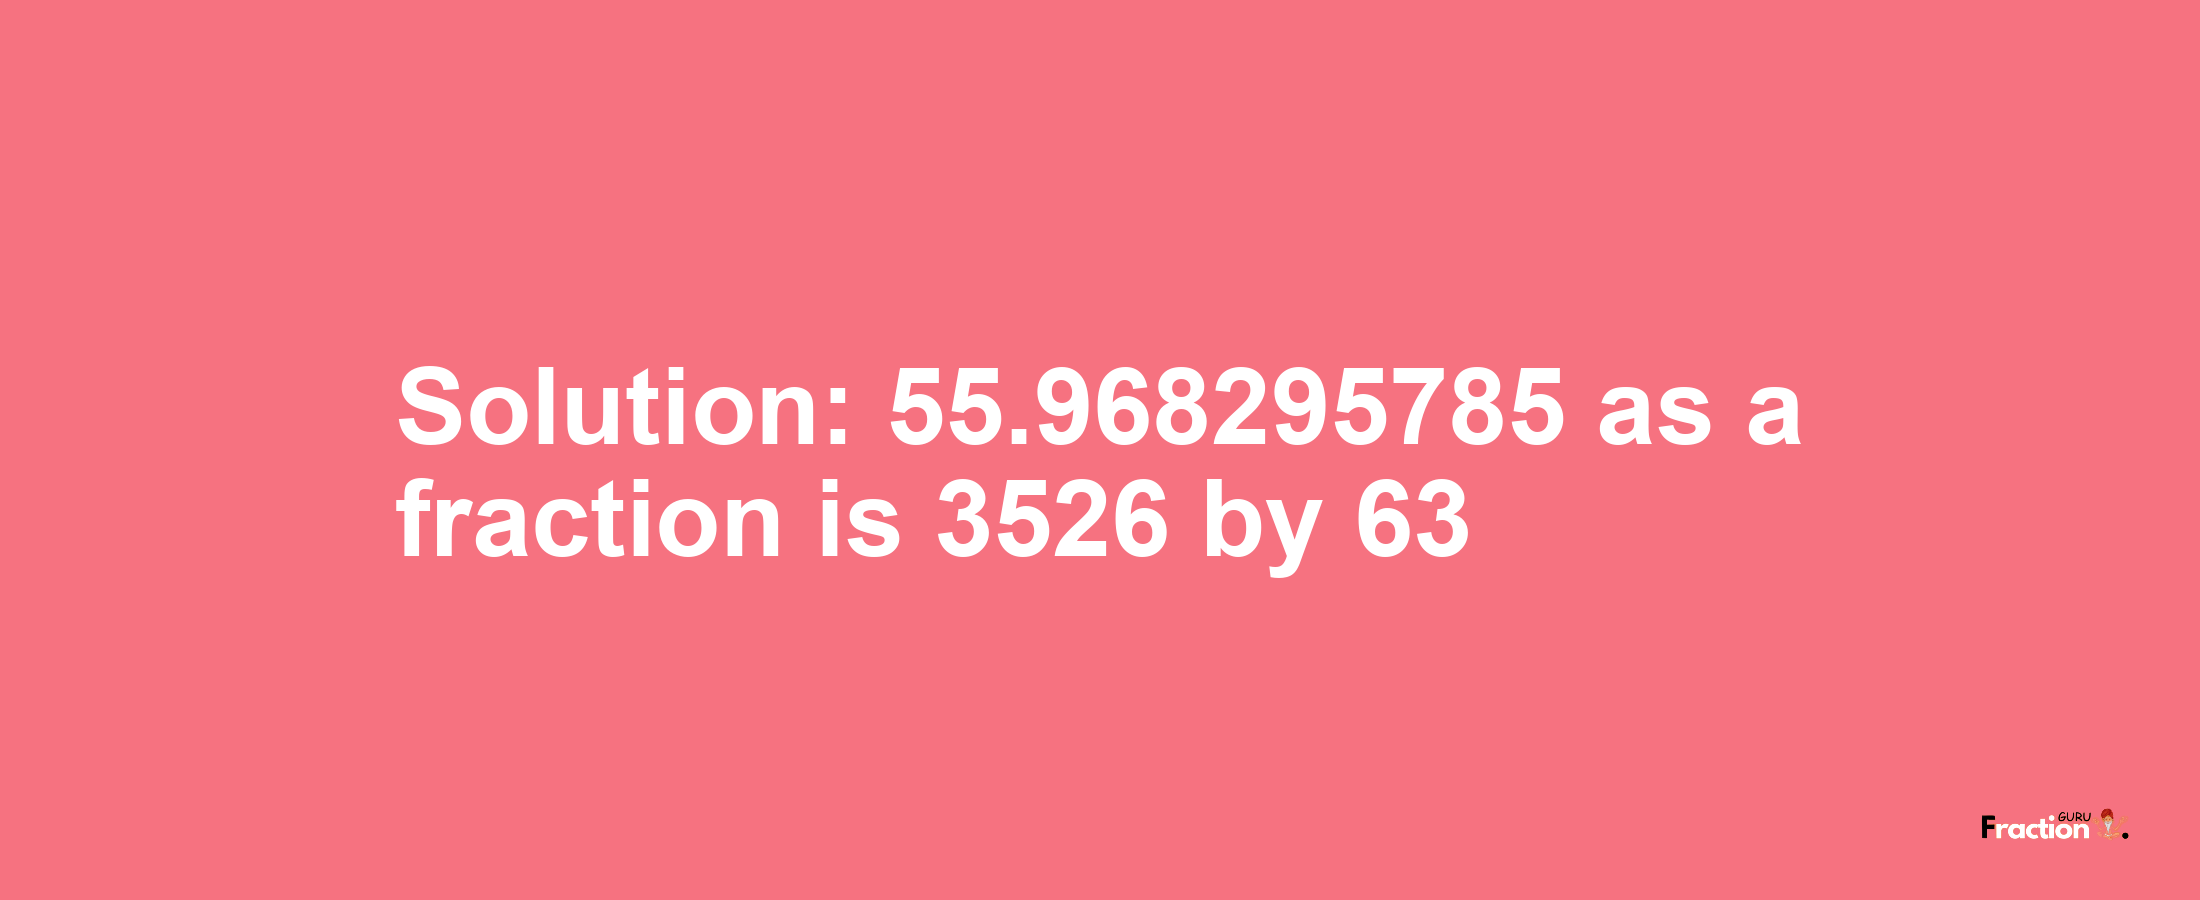 Solution:55.968295785 as a fraction is 3526/63